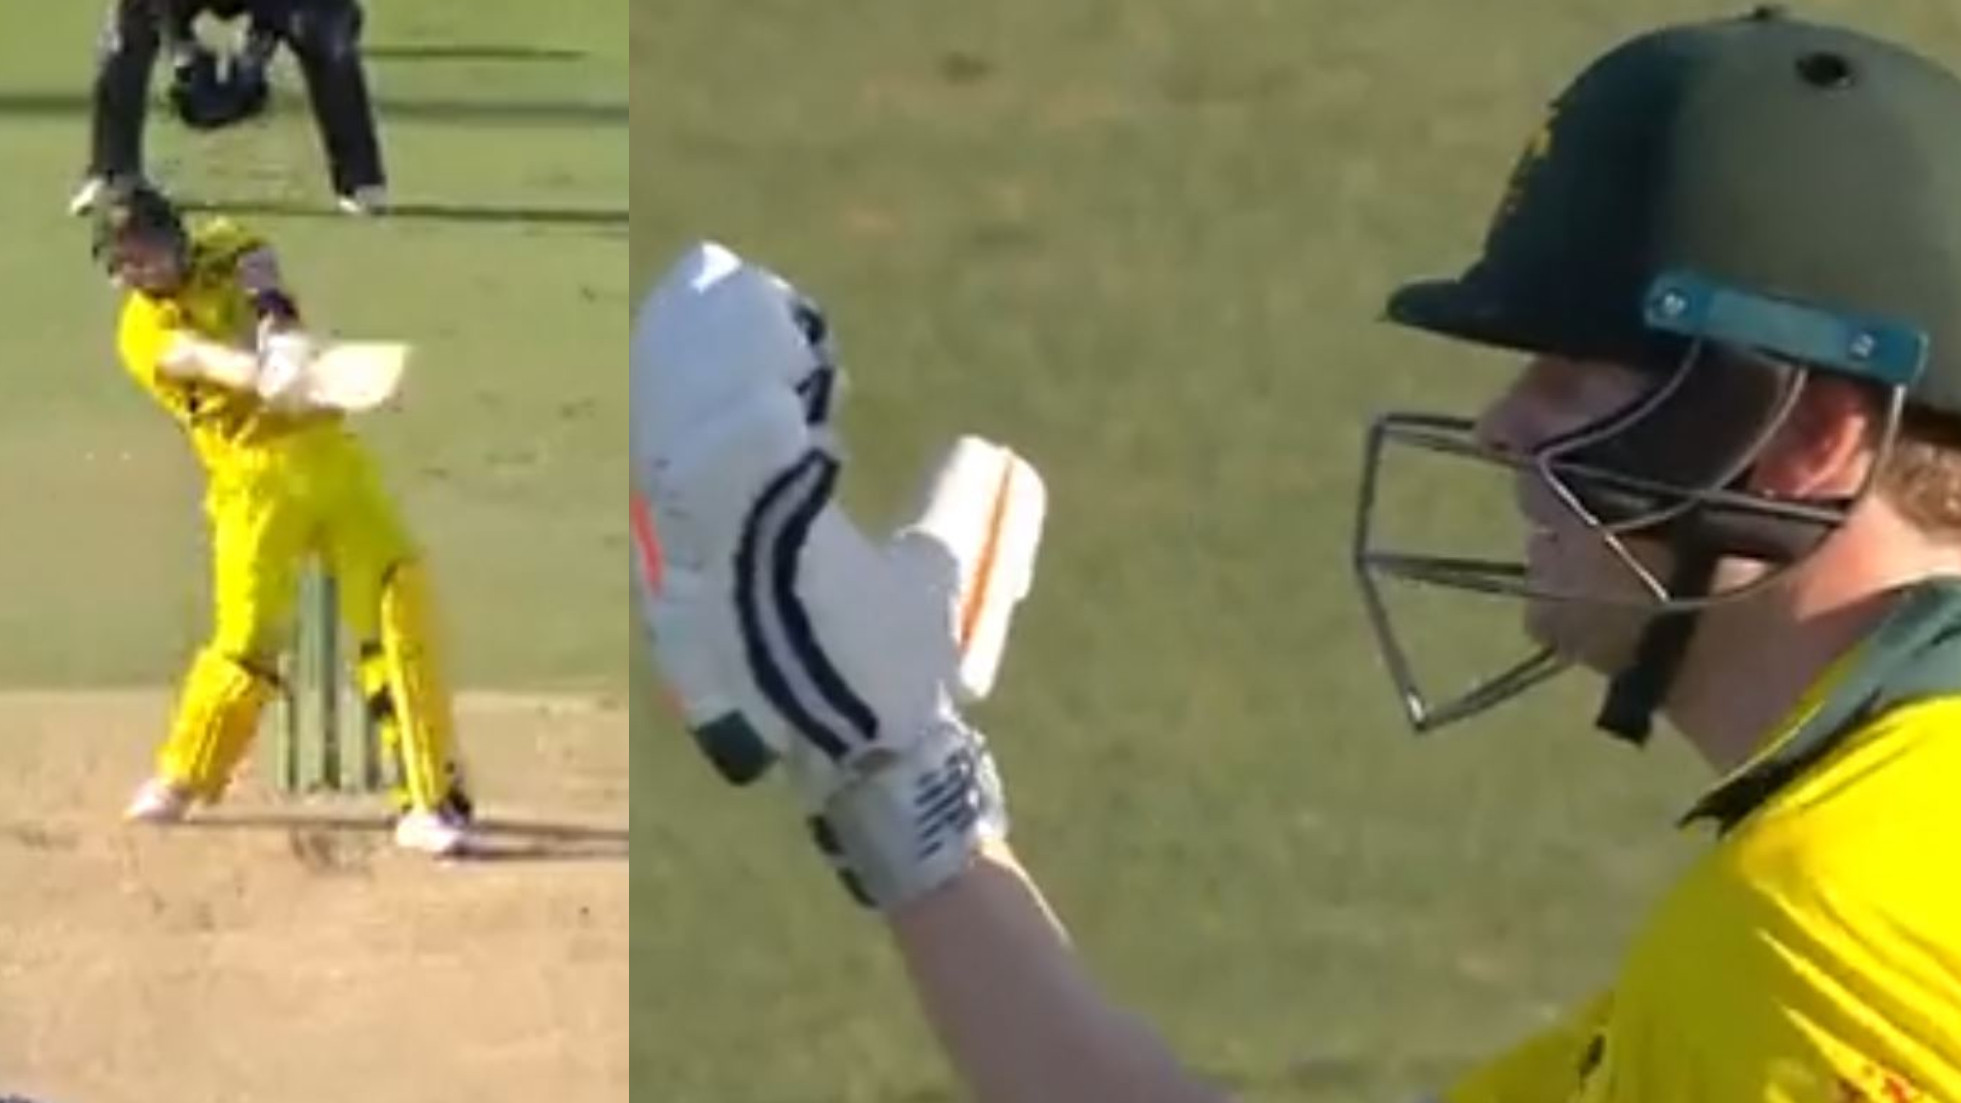 AUS v NZ 2022: WATCH- Smith hits six knowing it’s a no-ball; asks umpires to count fielders outside the circle